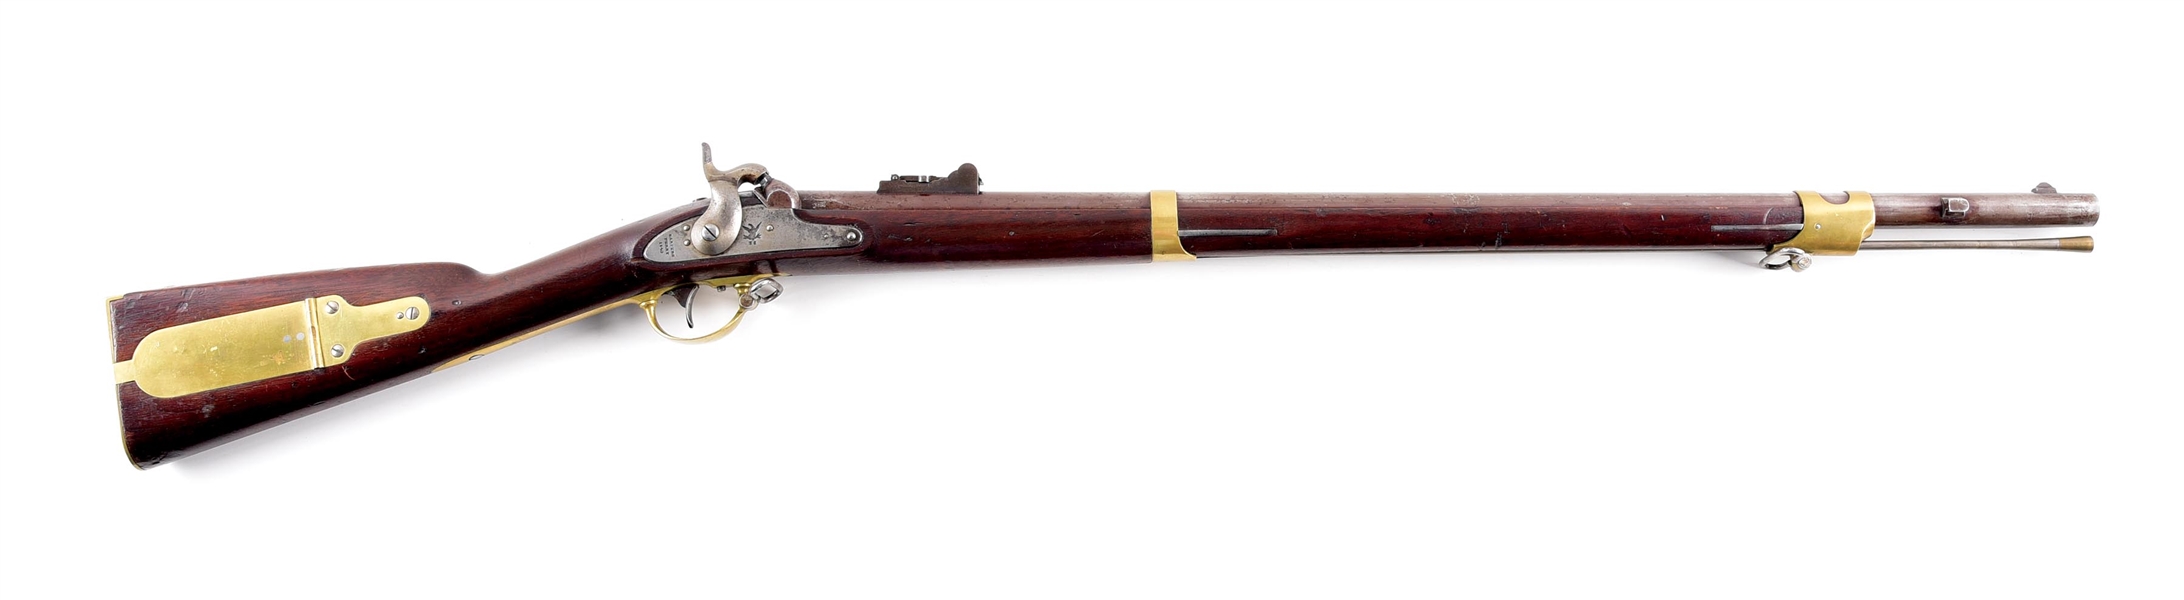 (A) SCARCE U.S. HARPERS FERRY MODEL 1841 MISSISSIPPI RIFLE DATED 1849.